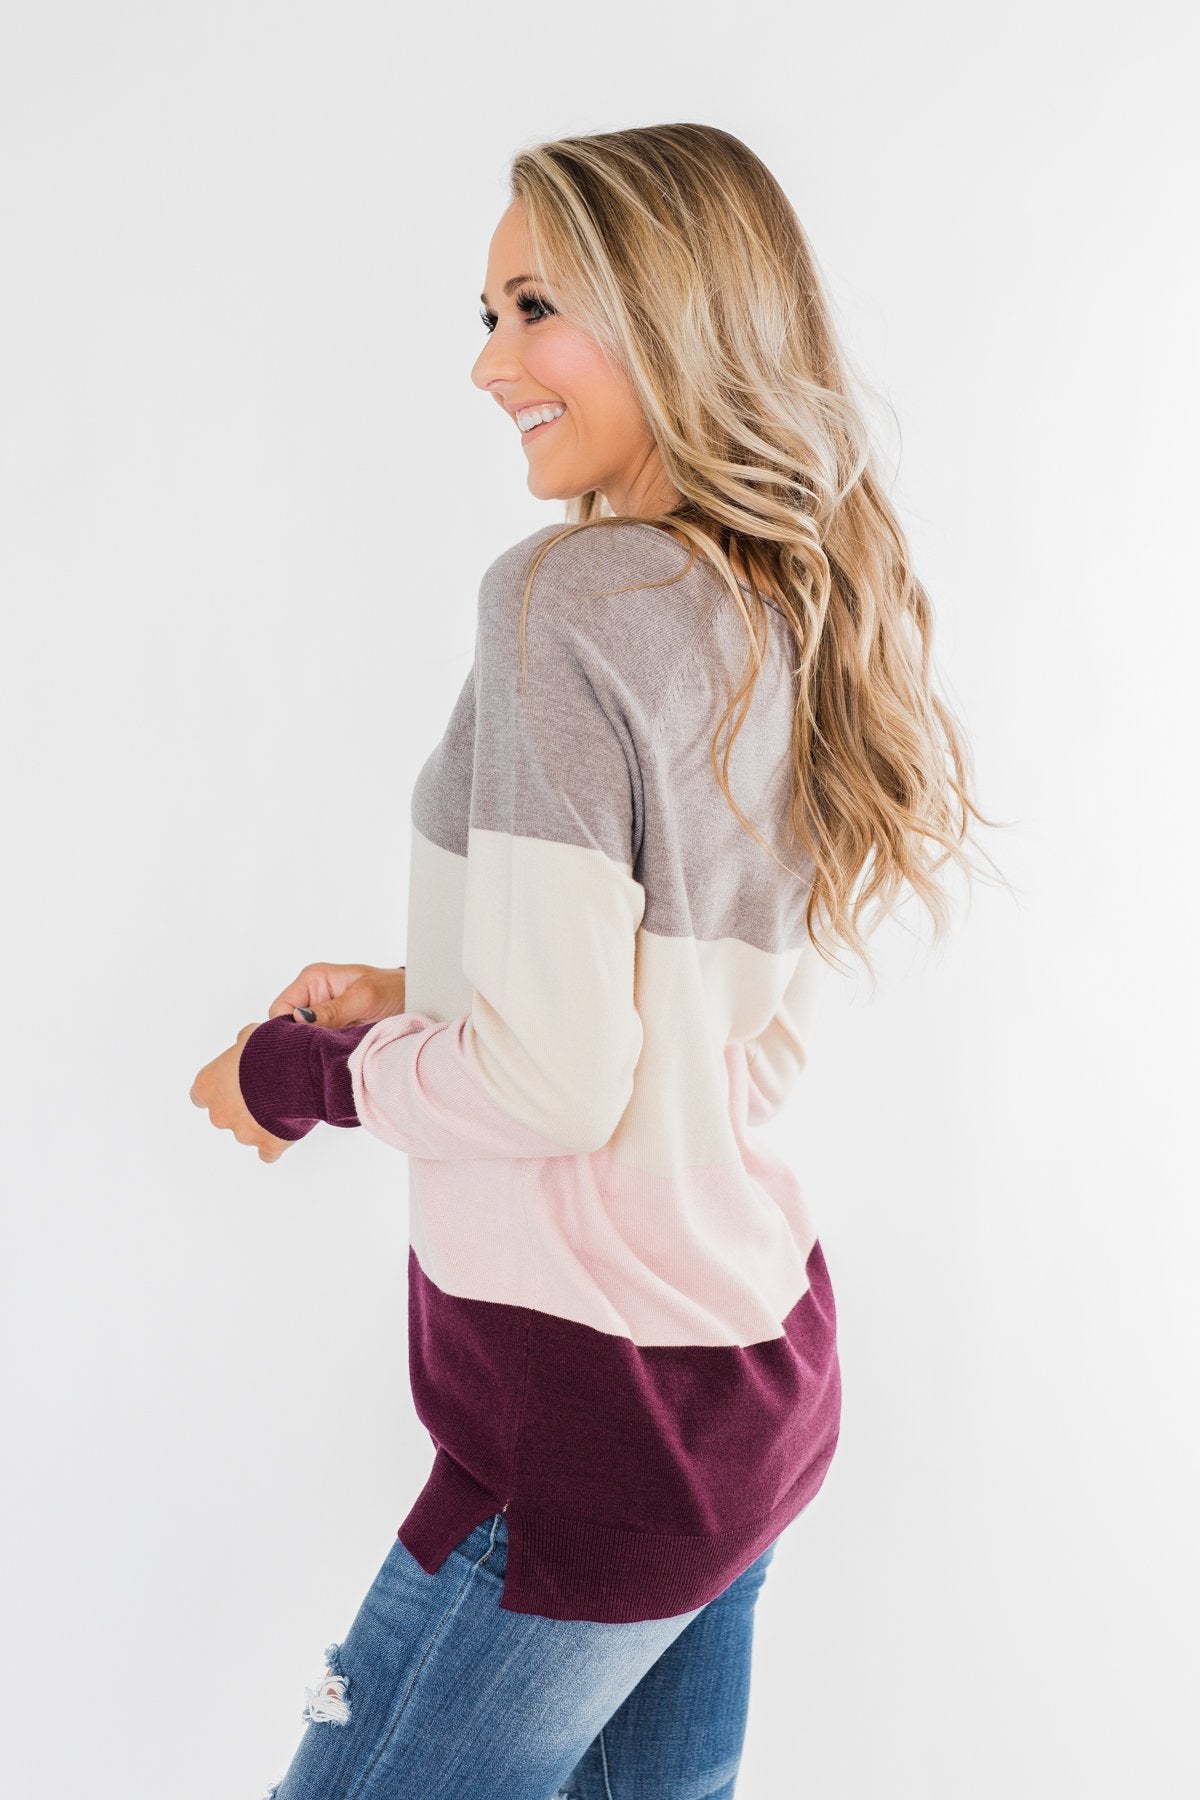 Be Yourself Color Block Sweater- Grey, Cream, & Blush